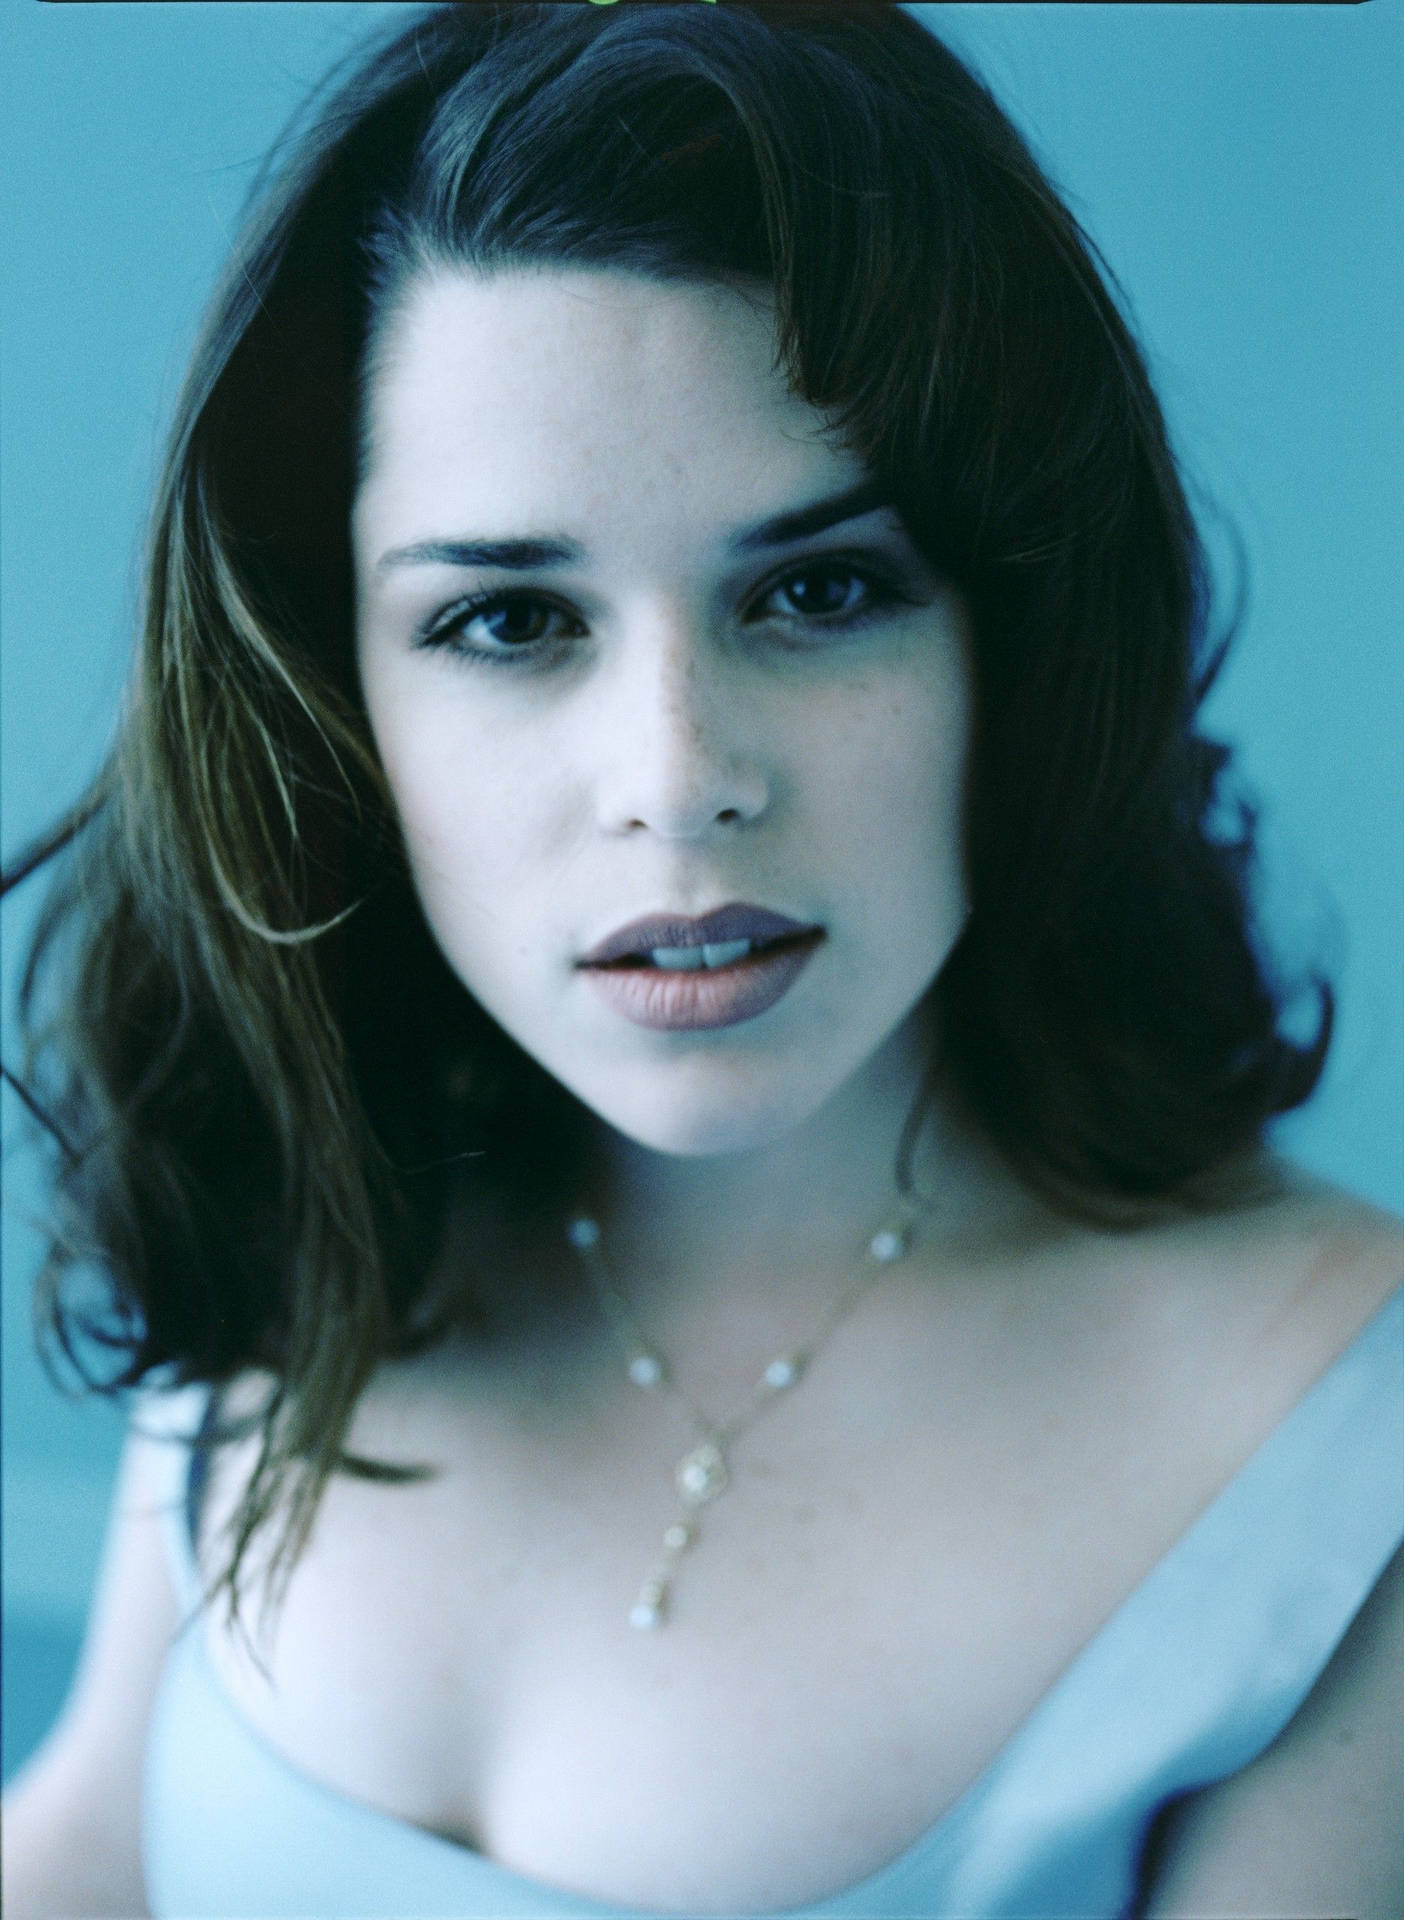 Elegance Personified: Neve Campbell in a Blue Top Wallpaper